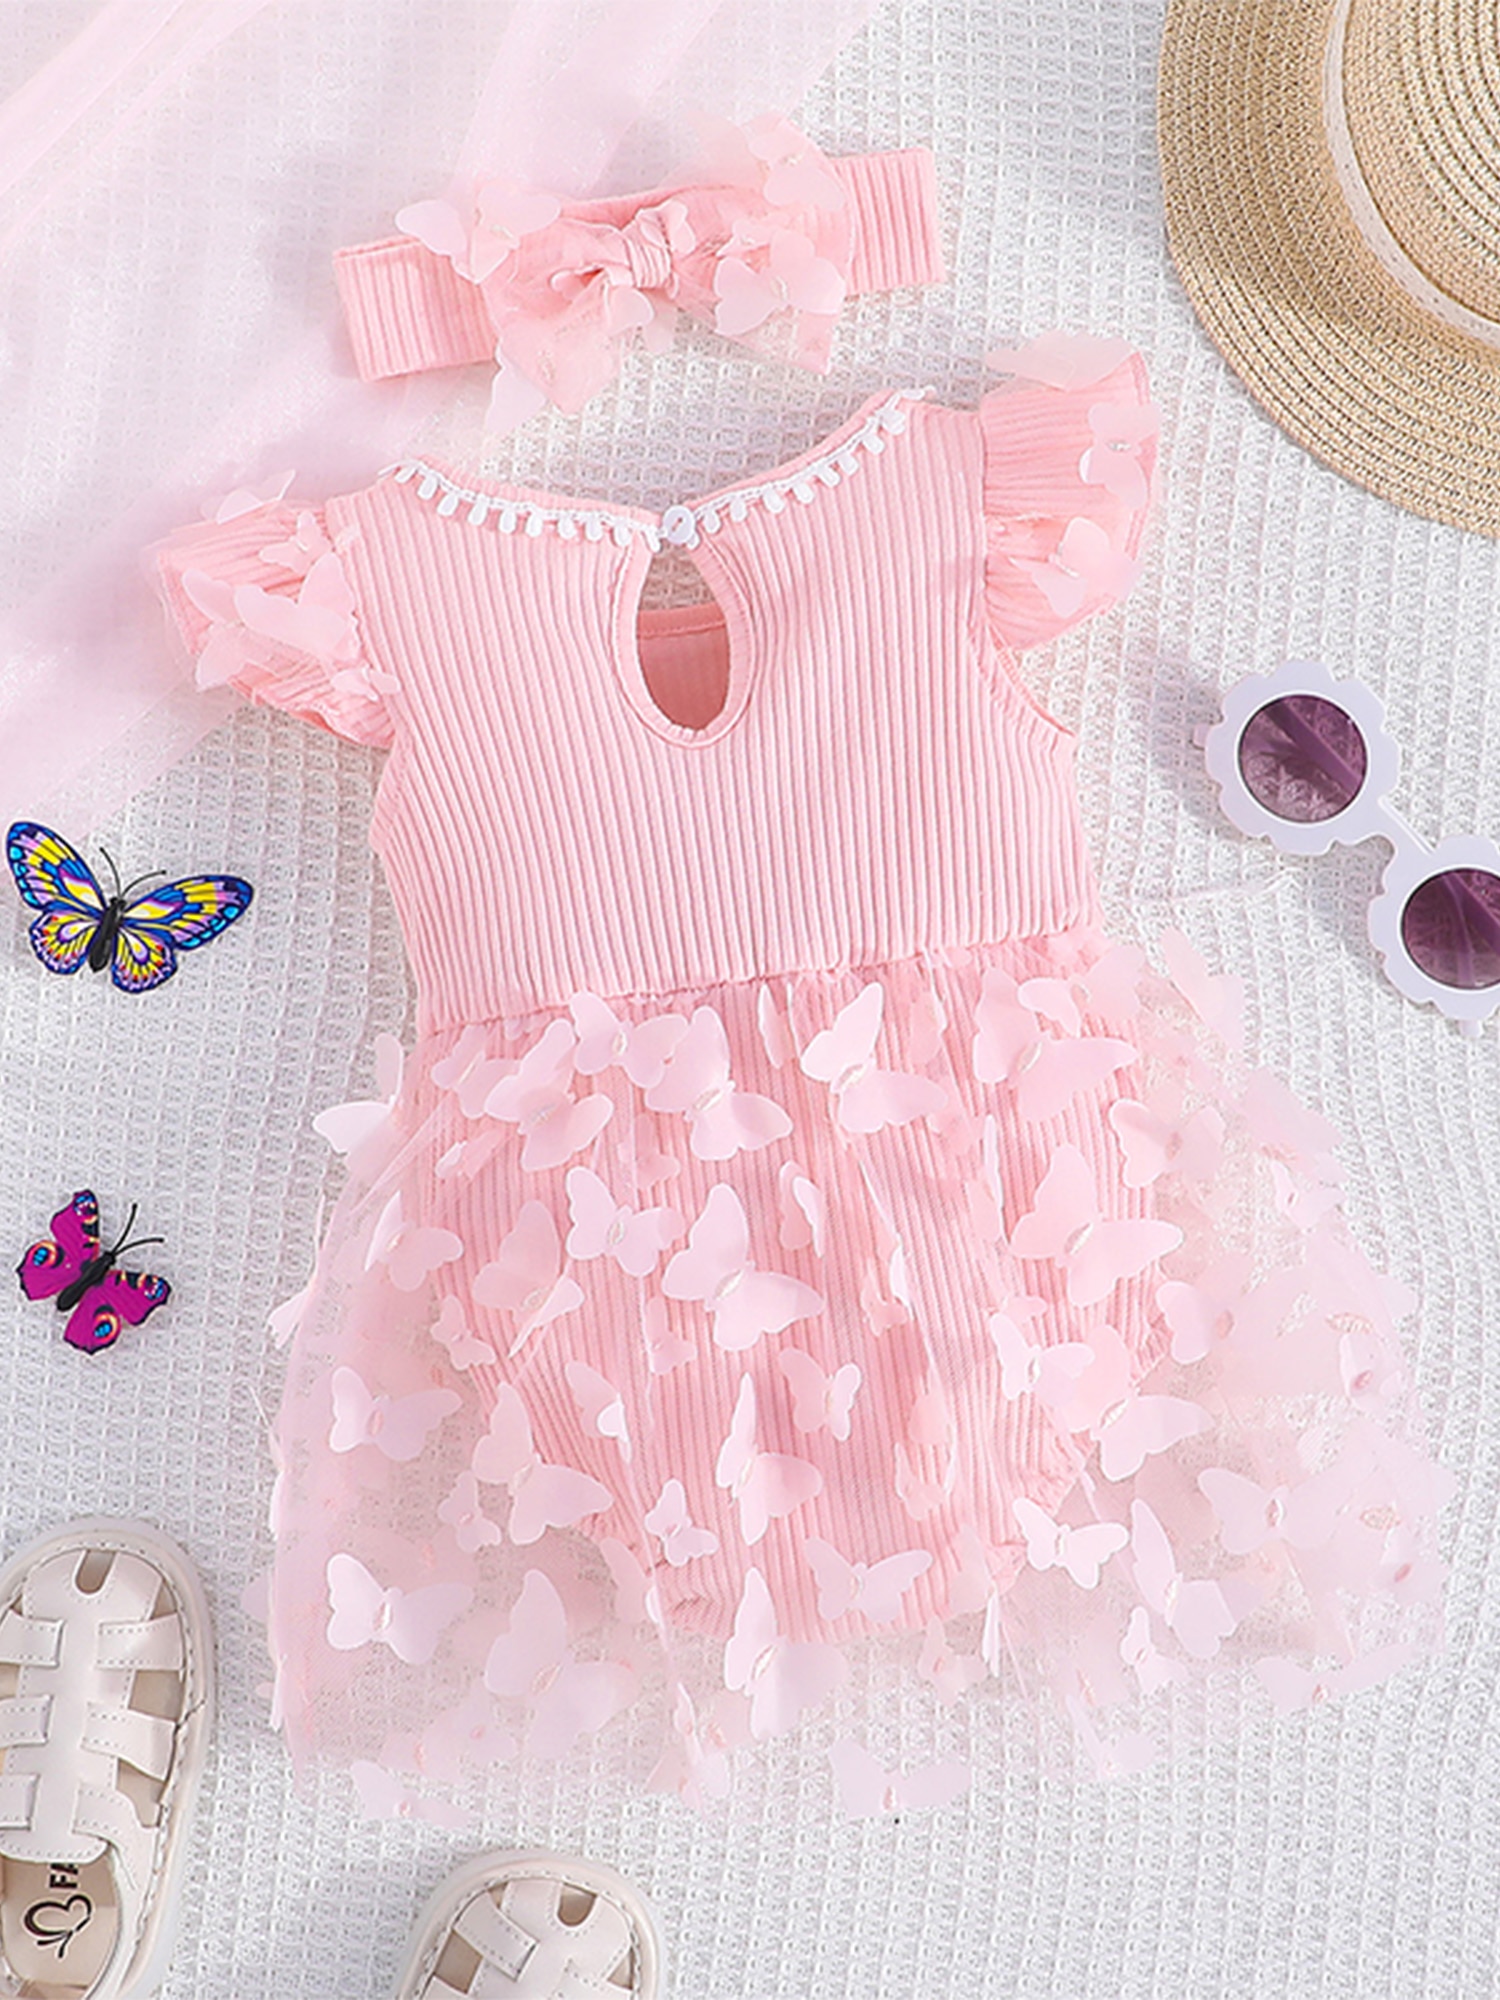 Mubineo-Baby-Girl-Summer-Clothes-Outfits-Sleeveless-Lace-Floral-Romper-Dress-Newborn-Outfit-Zft-Purple-0-2